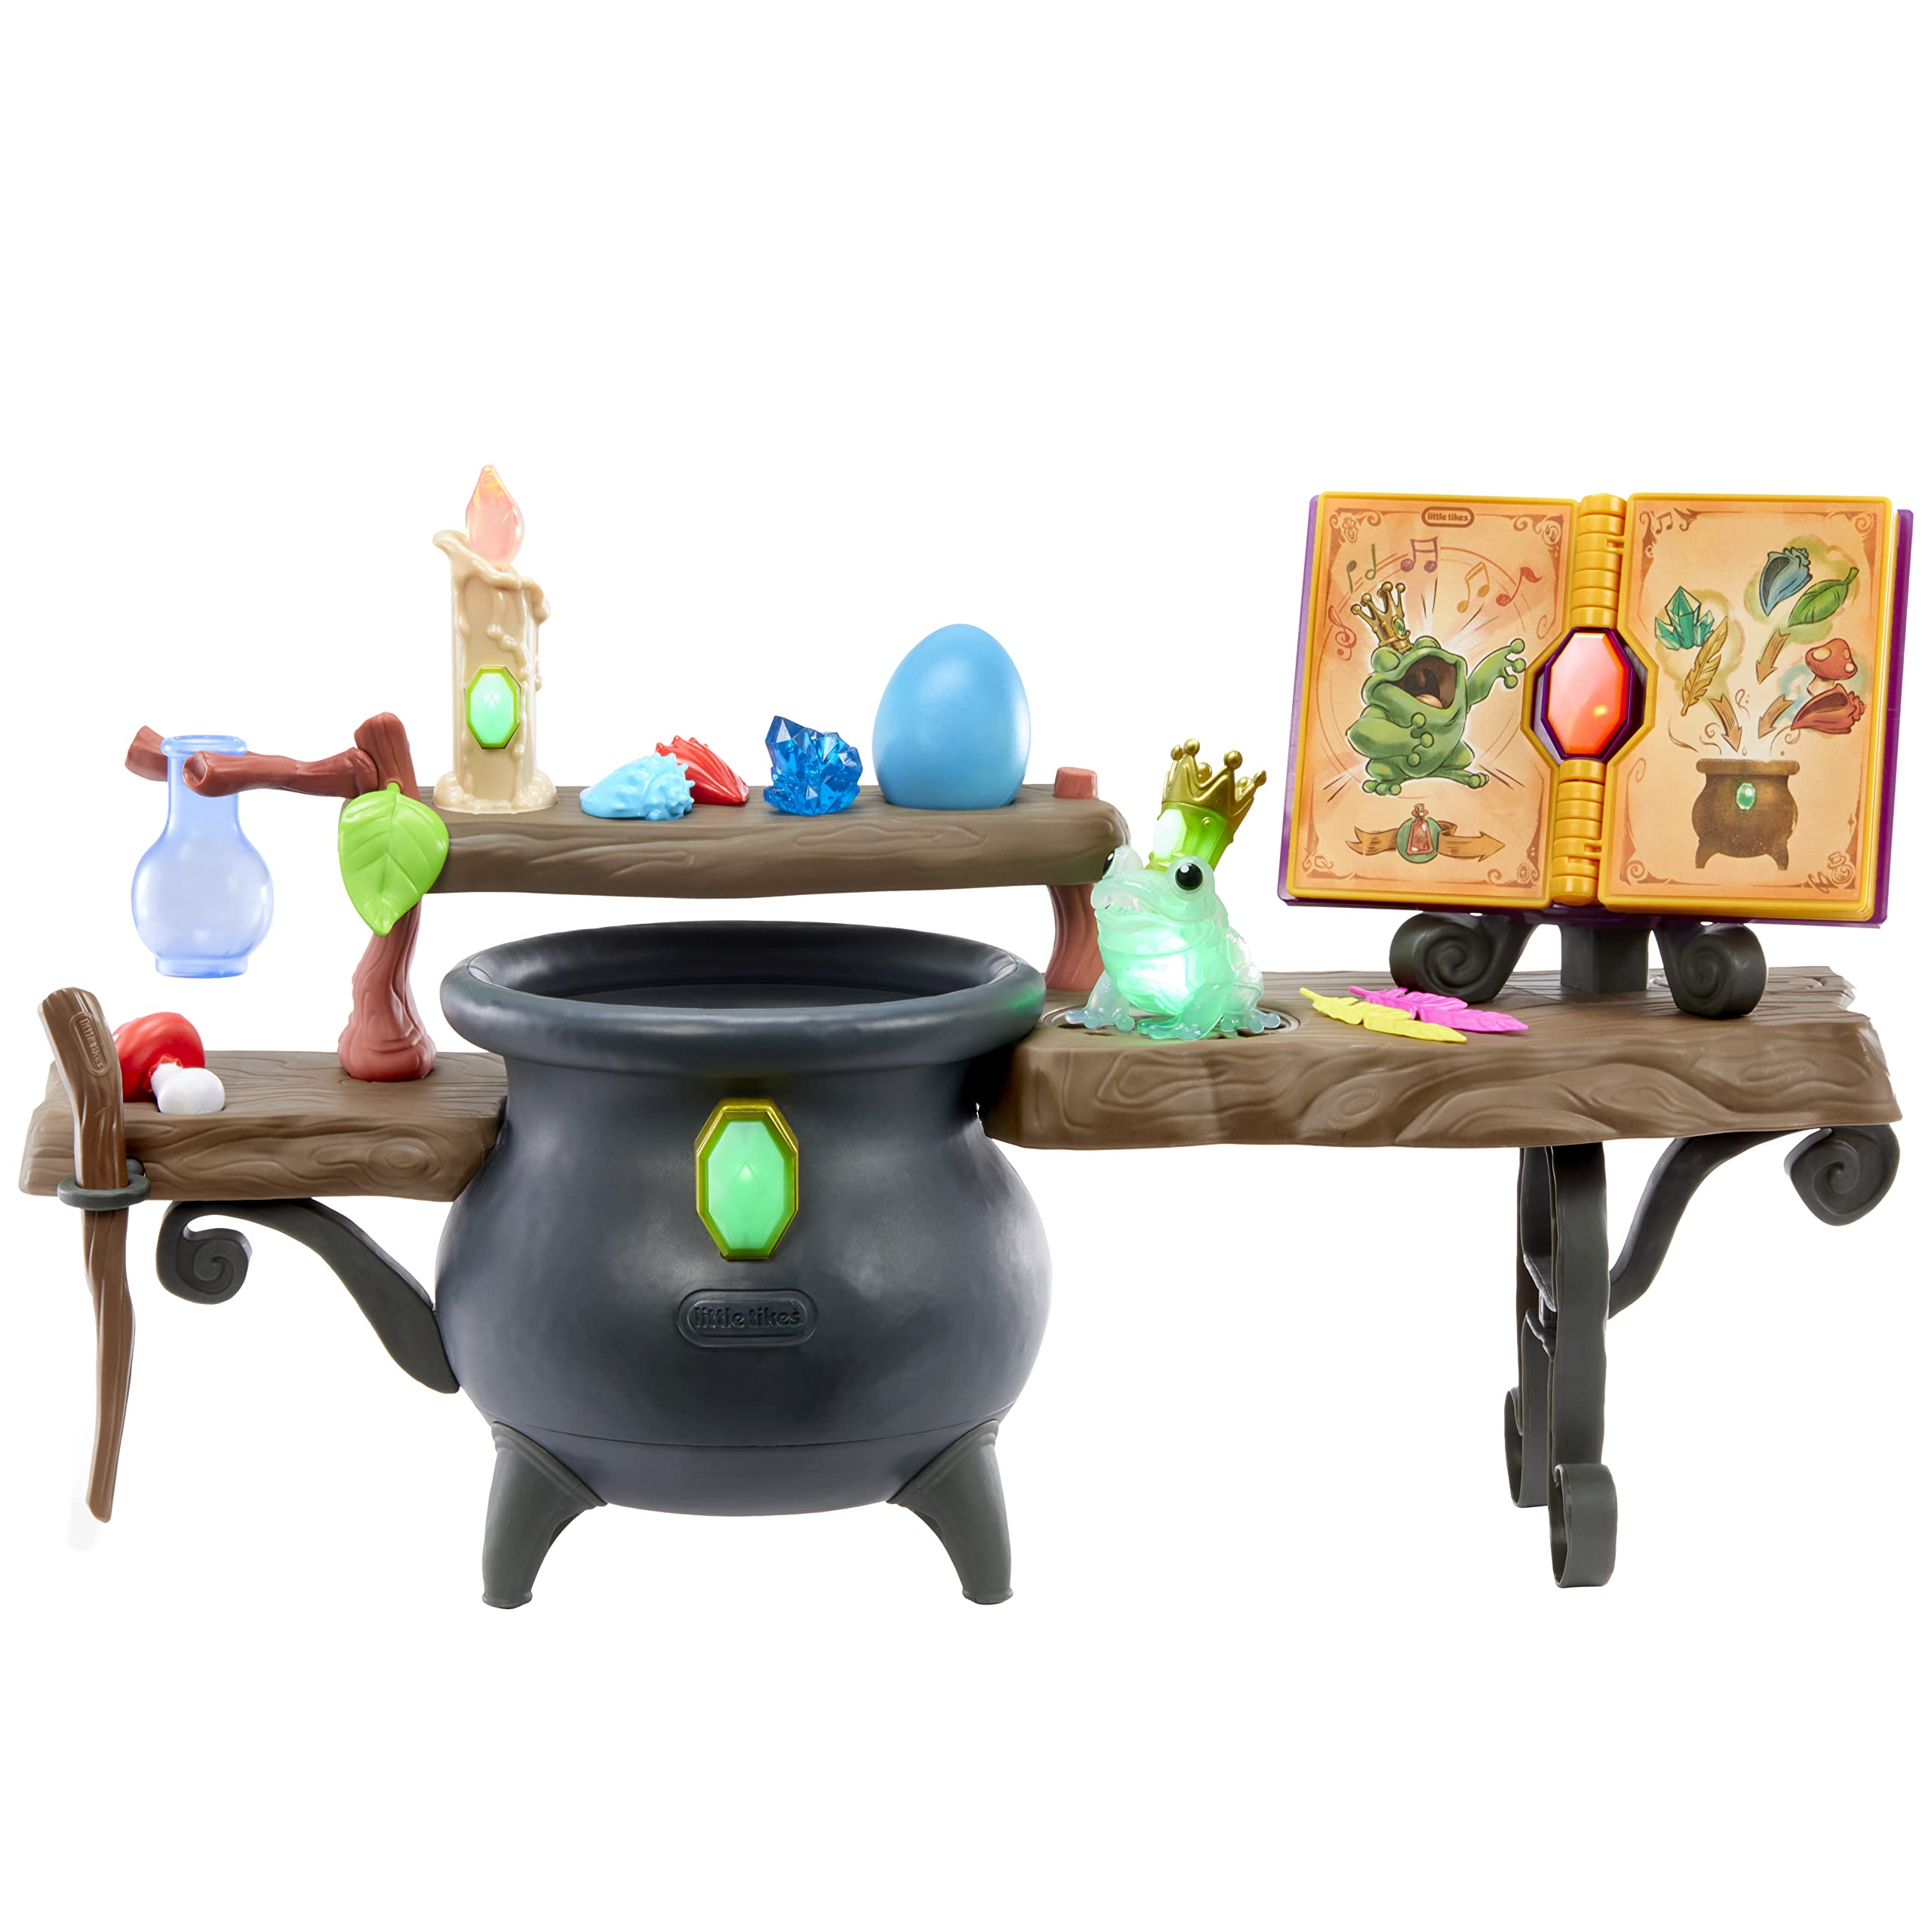 Little Tikes Magic Workshop Roleplay Tabletop Play Set for Kids, Boys, Girls, 3+